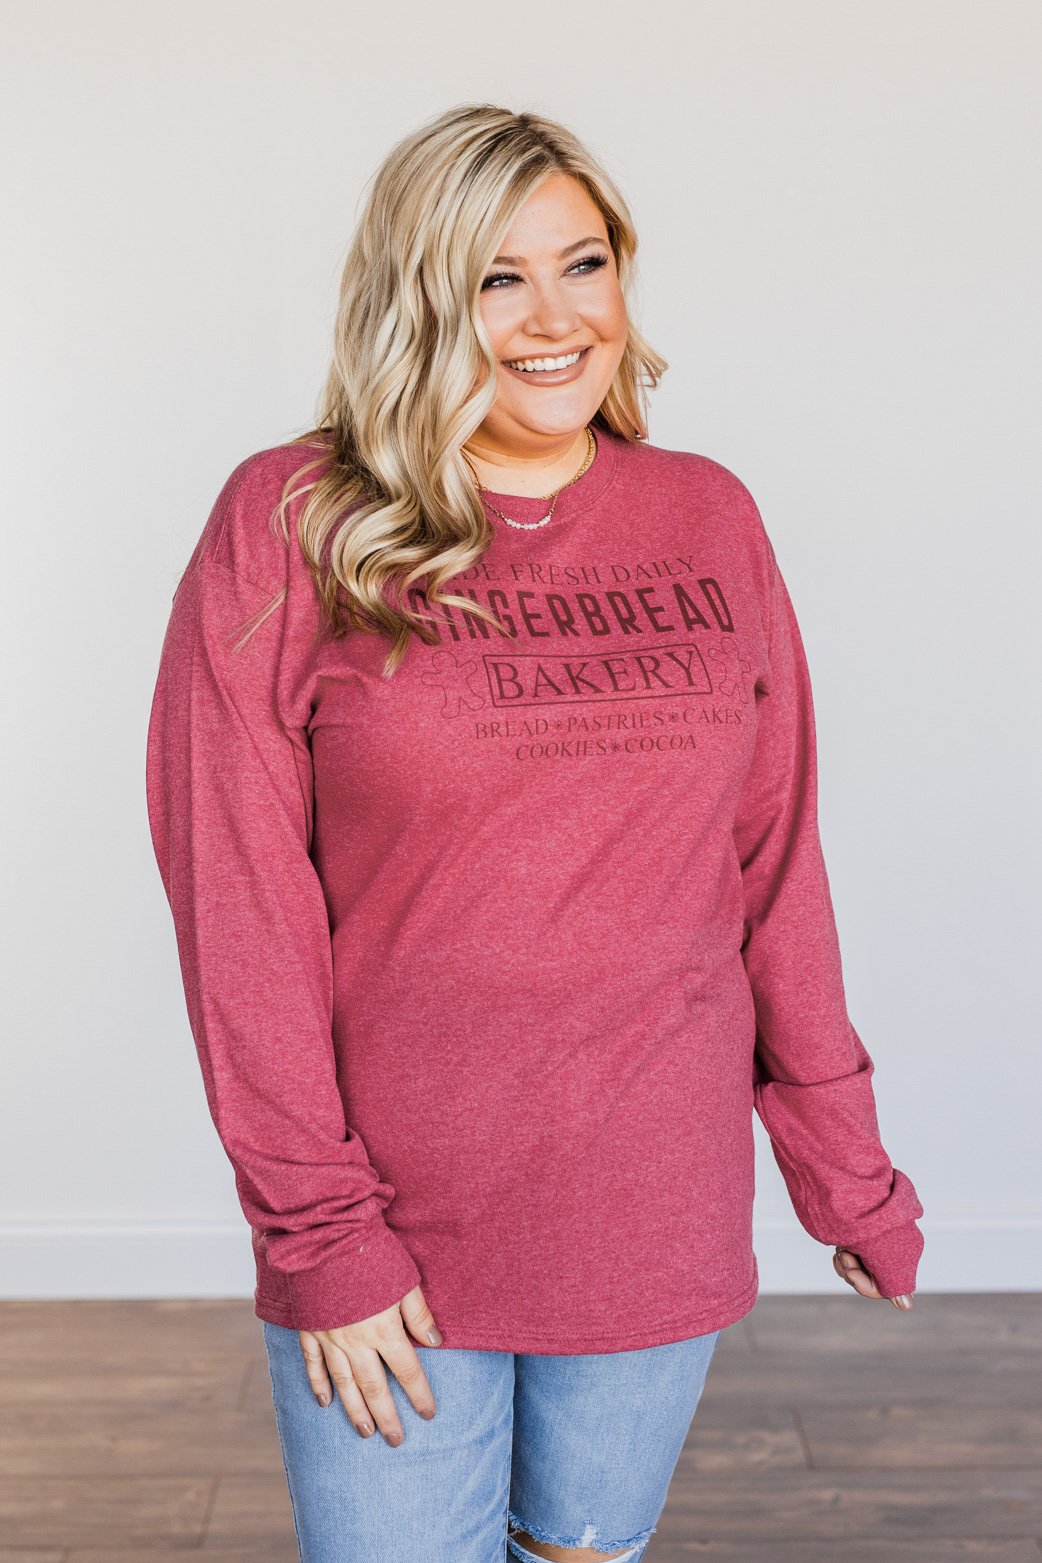 "Gingerbread Bakery" Graphic Long Sleeve Top- Red